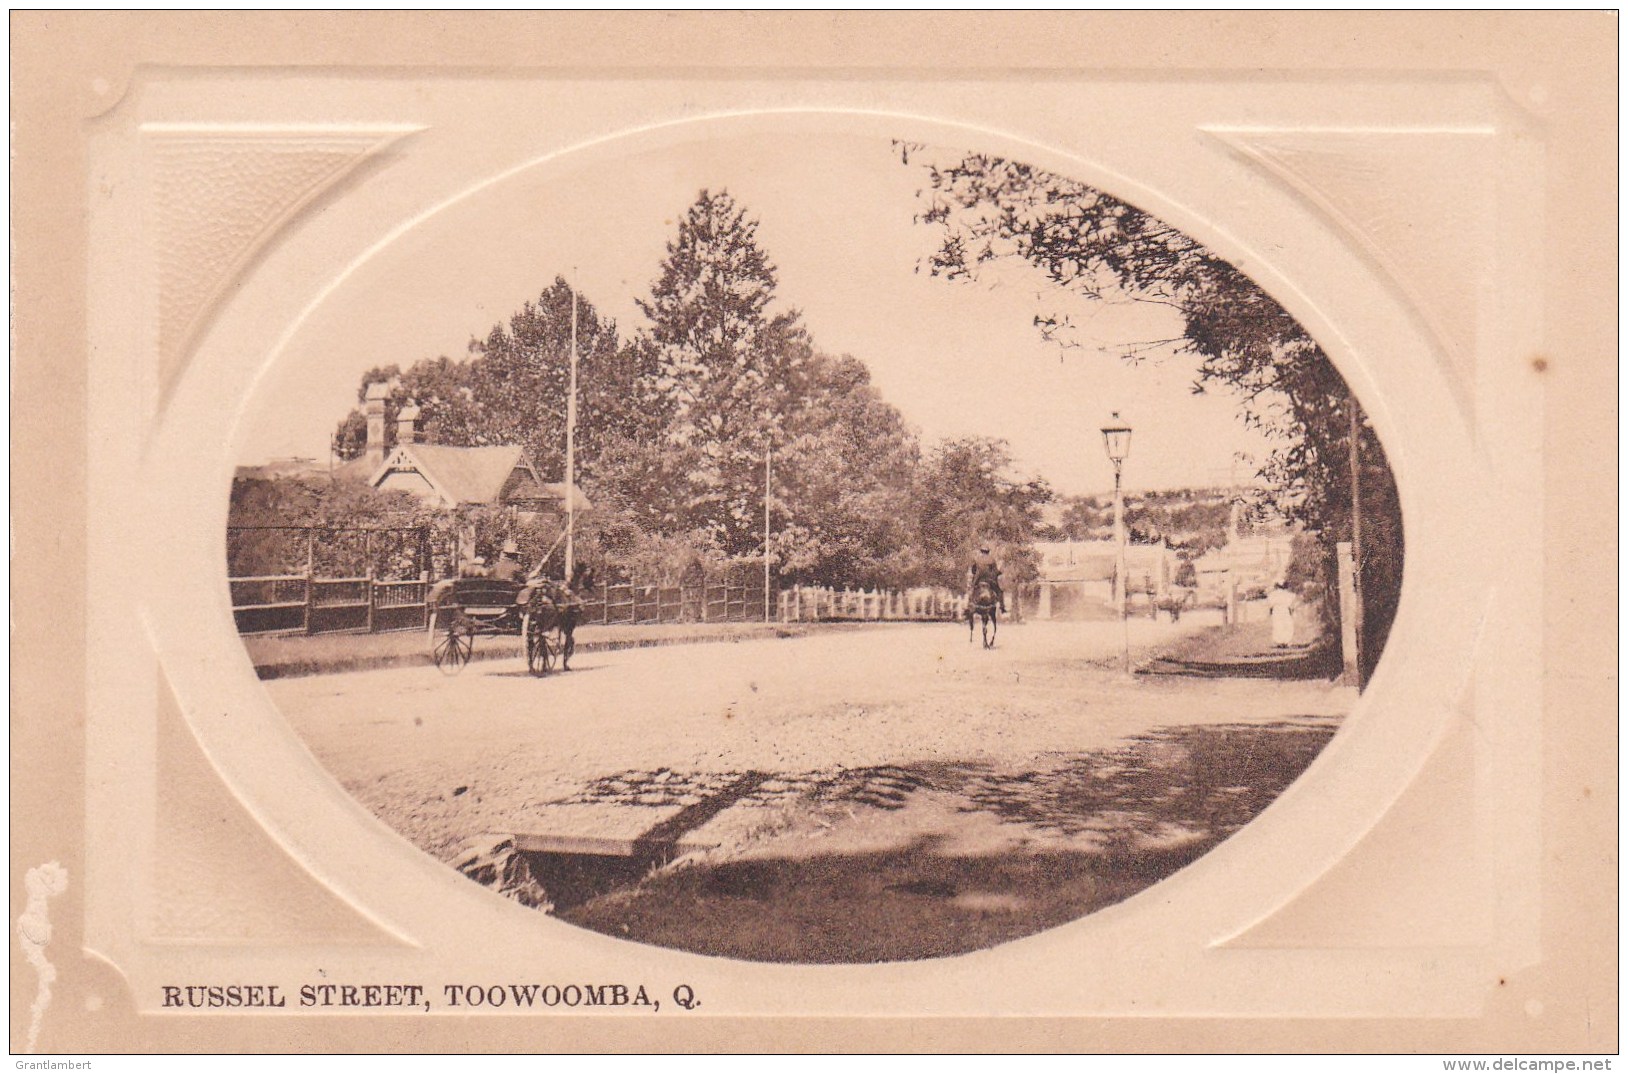 Russel Street, Toowoomba, Queensland - Vintage PC, Message Dated 1911 - Towoomba / Darling Downs